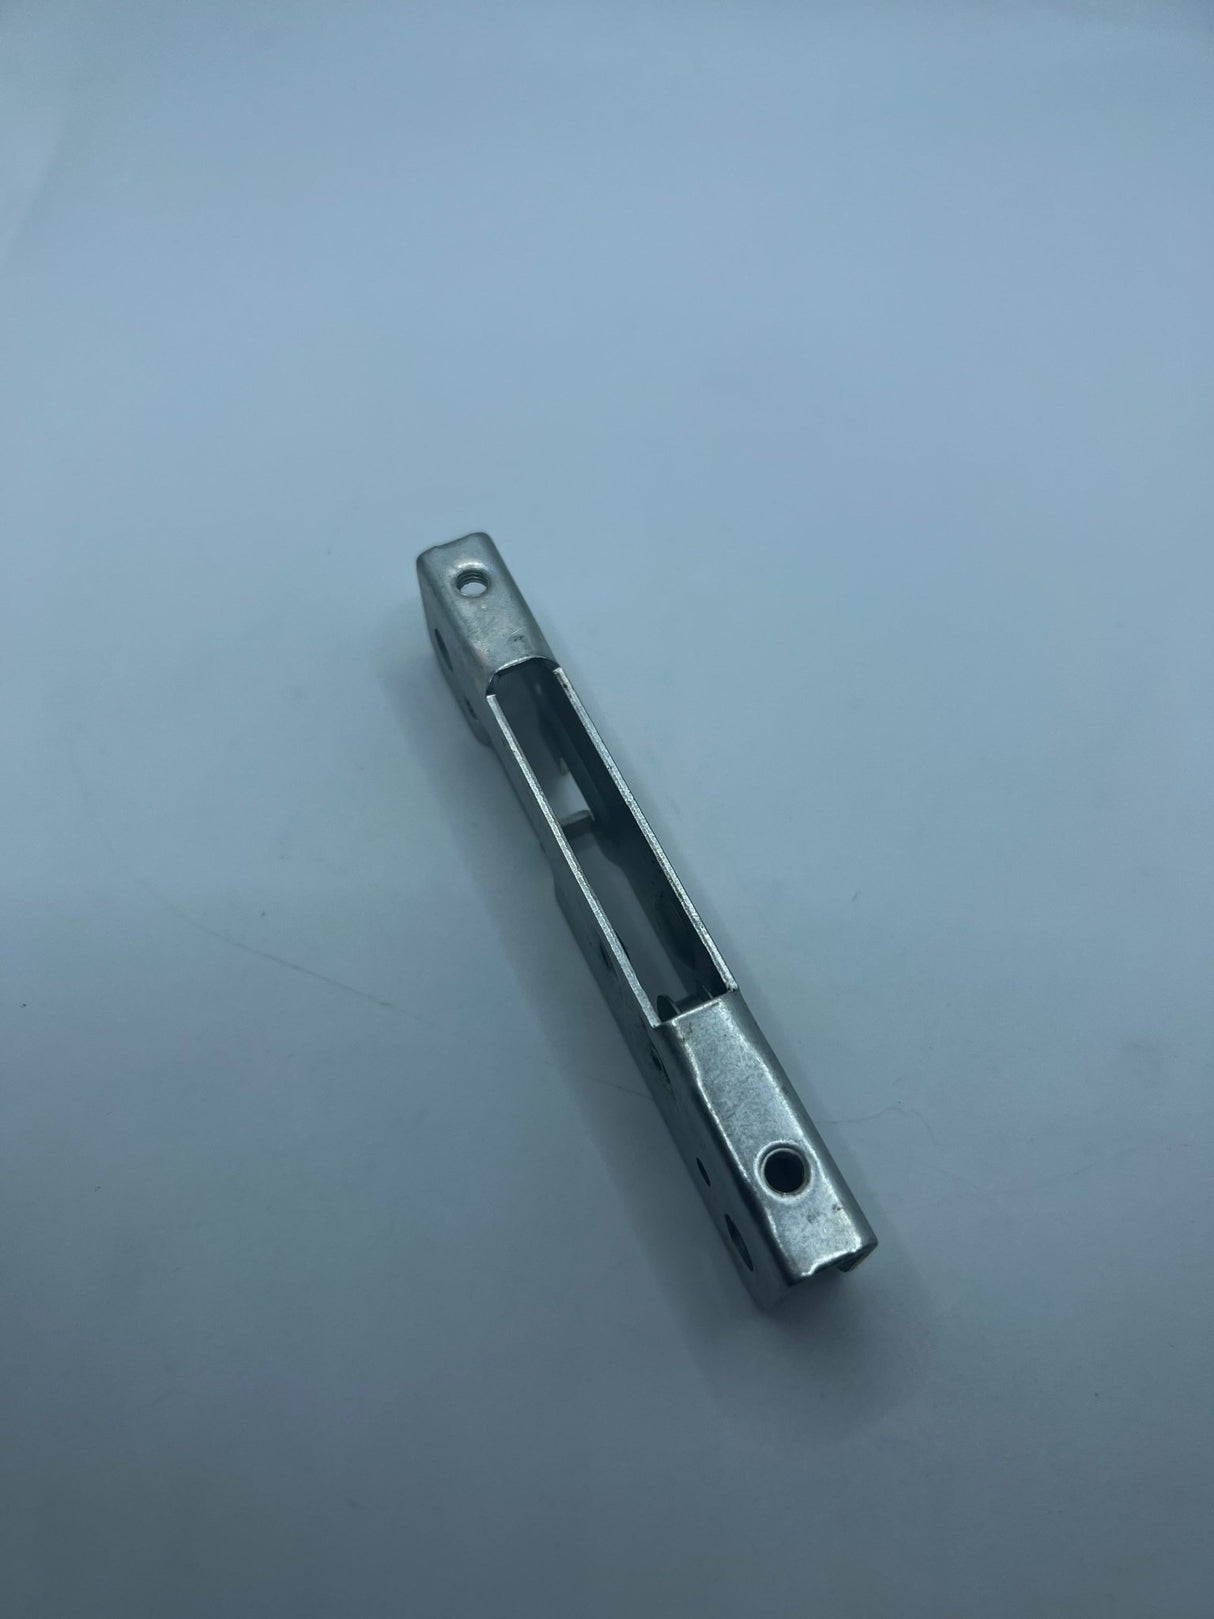 Ilve 900mm Oven Door Hinge Retainer Single A/468/04 - My Oven Spares-Ilve-A/468/04-4